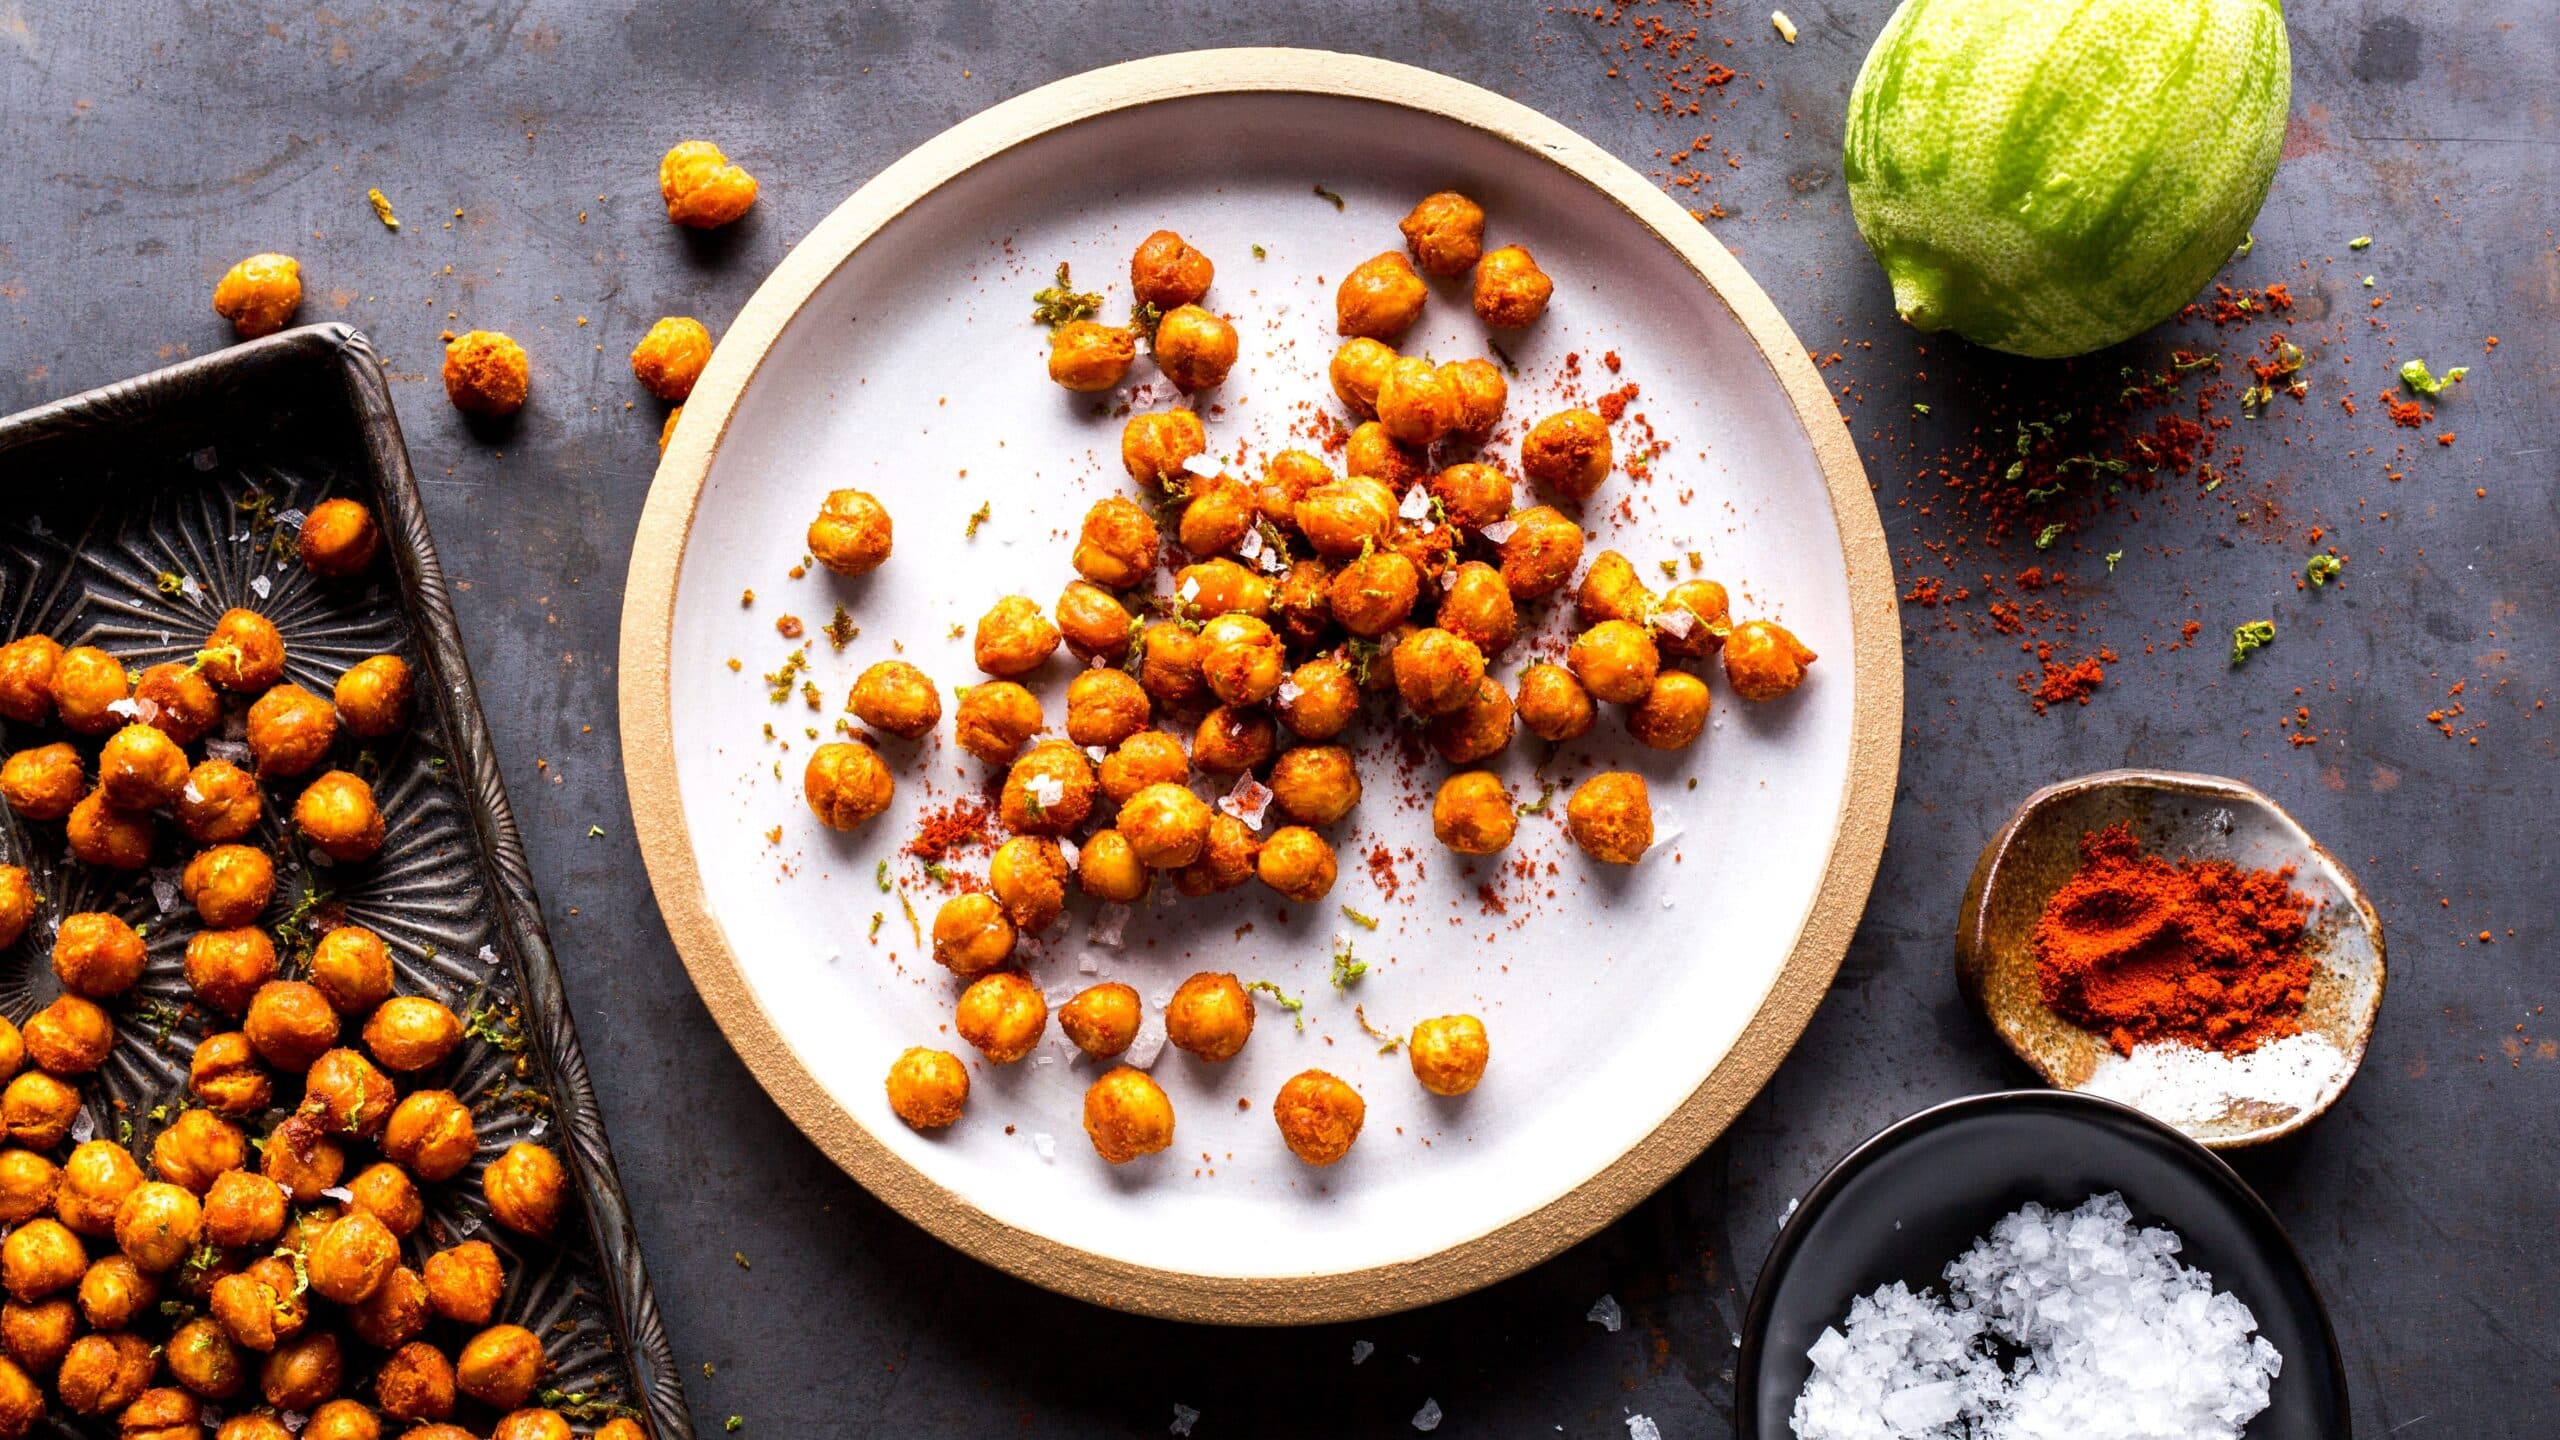 Oven-Roasted Chili-Lime Chickpeas